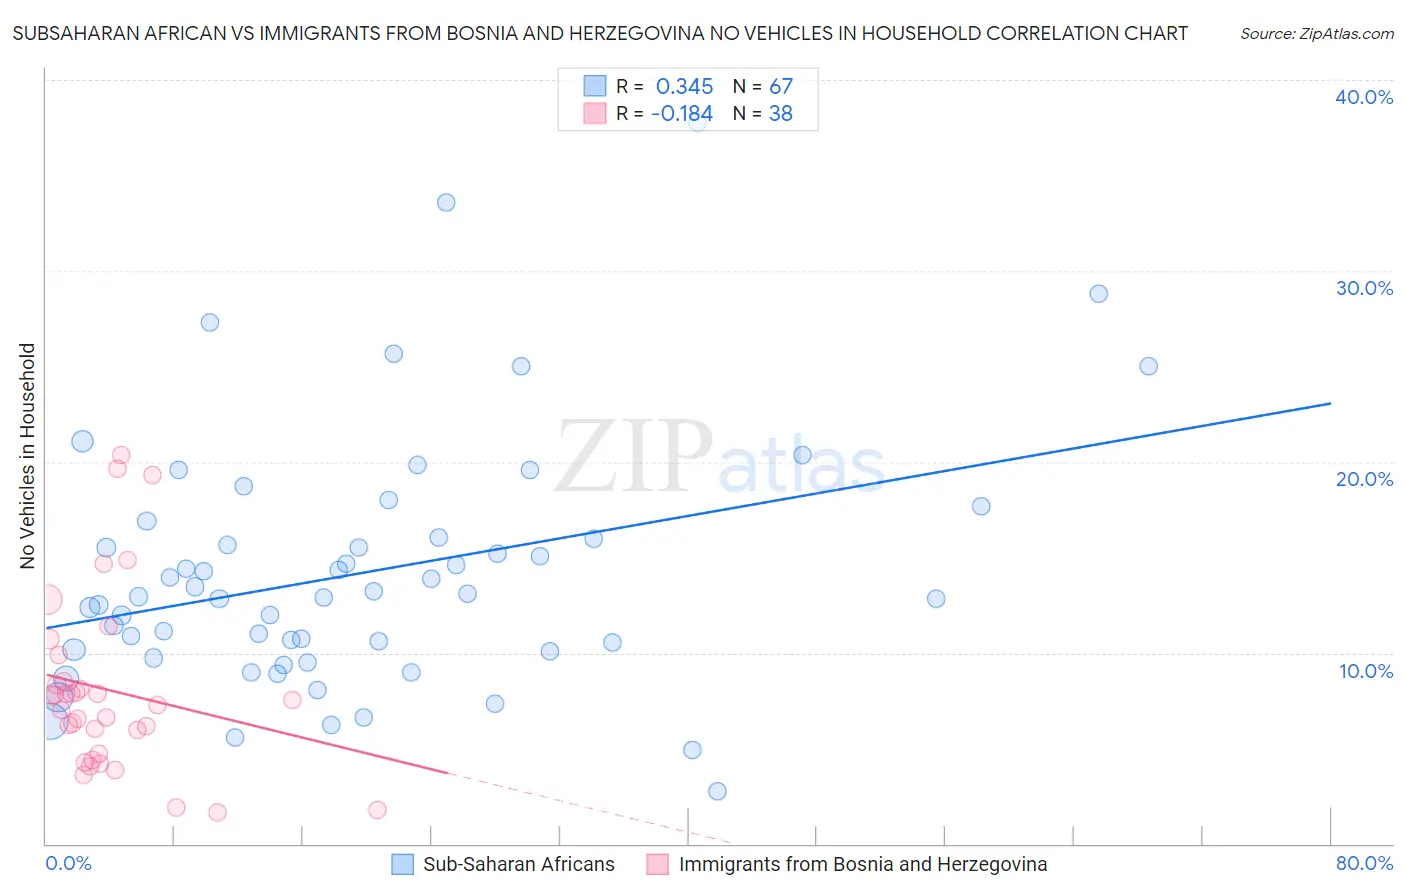 Subsaharan African vs Immigrants from Bosnia and Herzegovina No Vehicles in Household